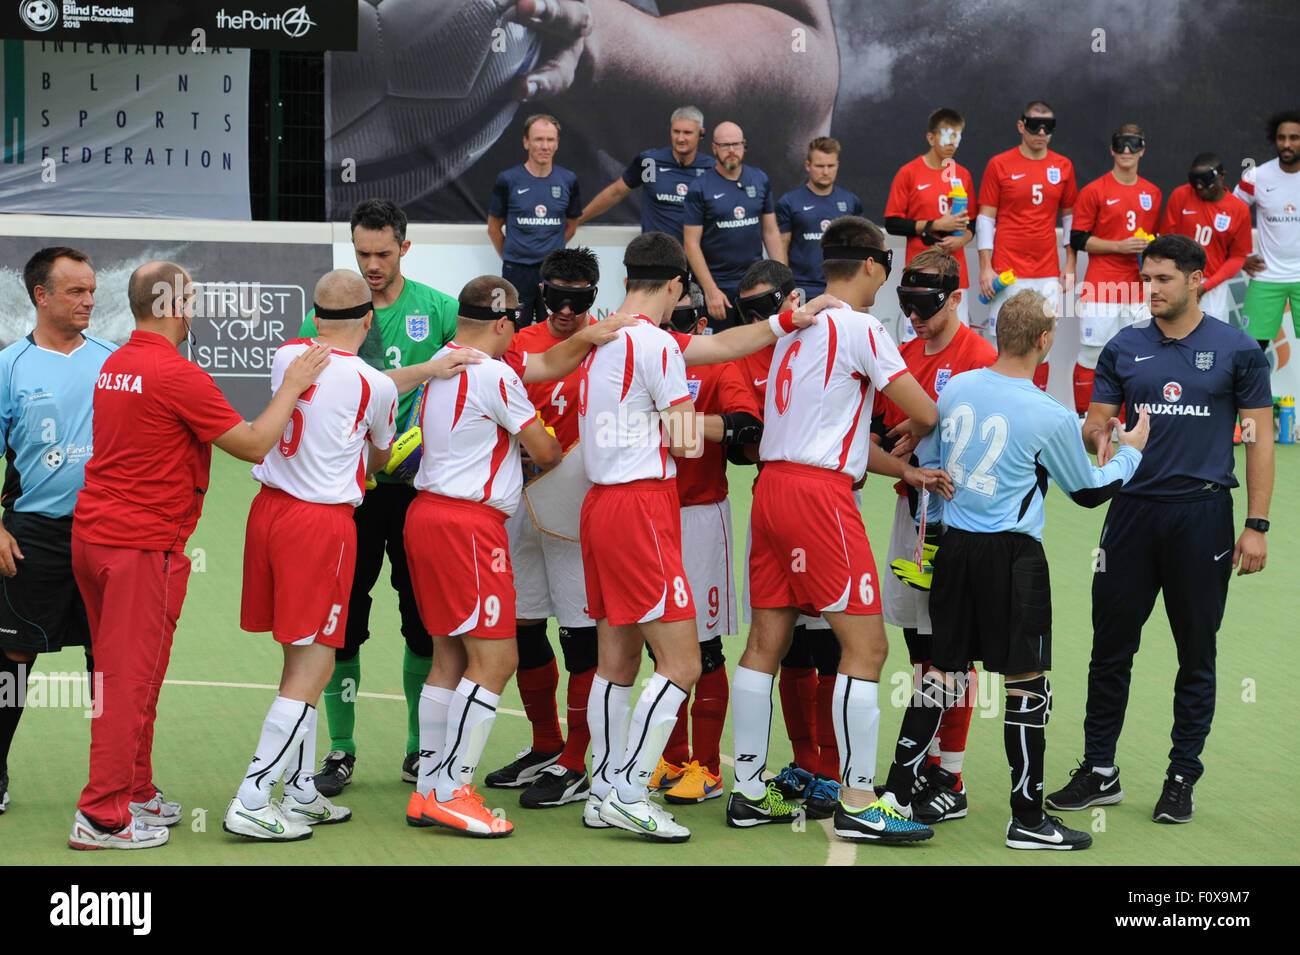 Hereford, UK. 22nd August, 2015. The IBSA Blind Football European Championships 2015 at Point 4, Hereford. England v Poland - The teams shake hands before the opening match. Credit:  James Maggs/Alamy Live News Stock Photo